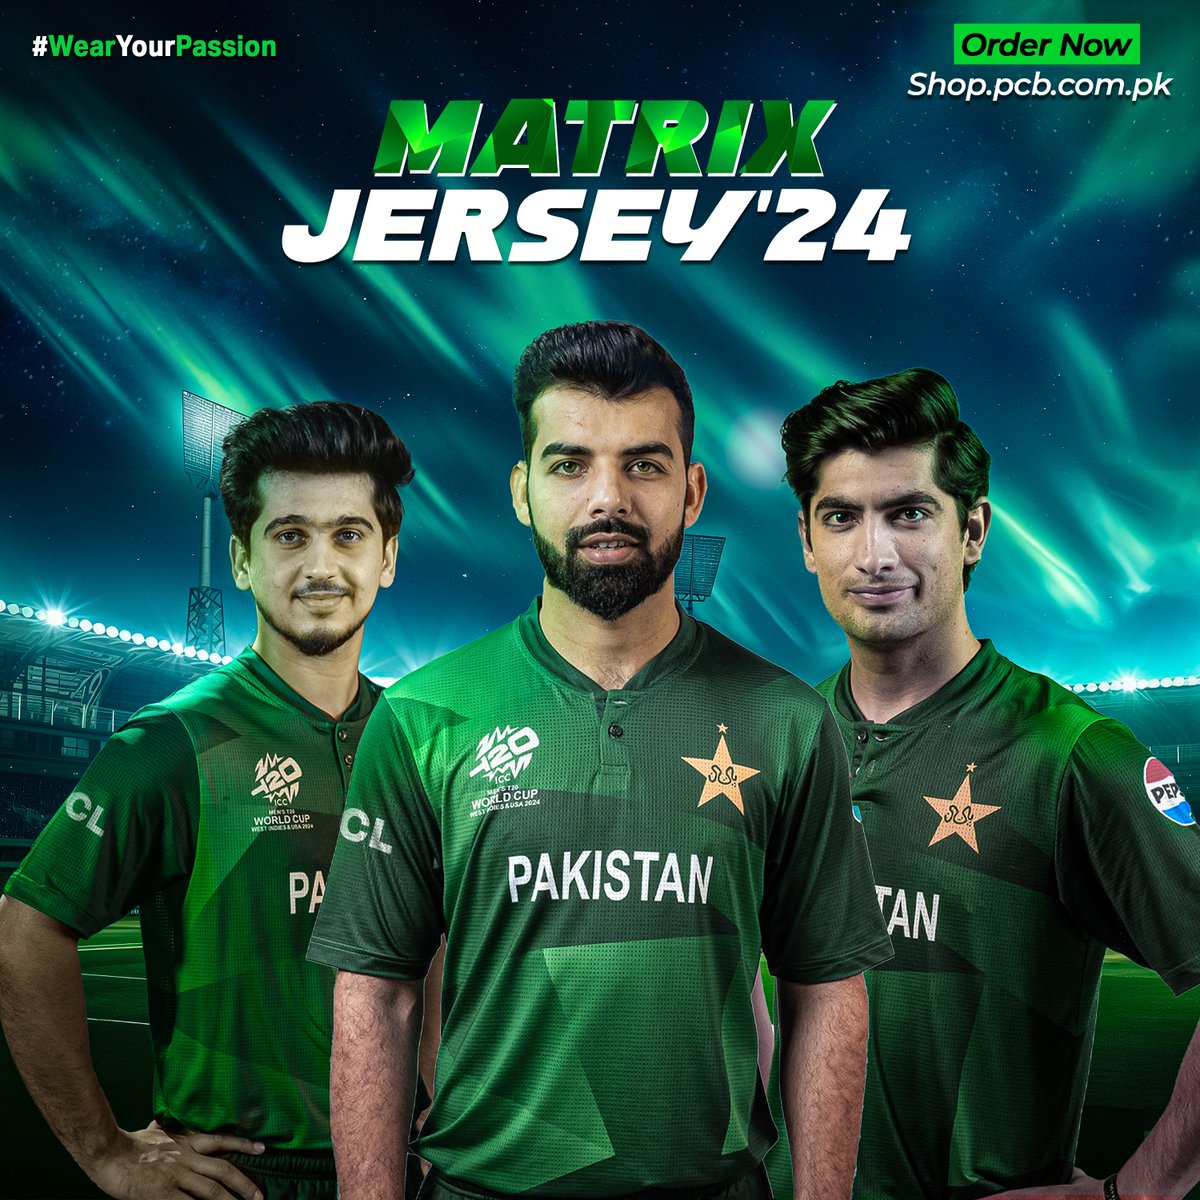 Order the Matrix Jersey'24 now and proudly #WearYourPassion for Pakistan cricket! 🇵🇰🌟

Get shopping at shop.pcb.com.pk 🚨